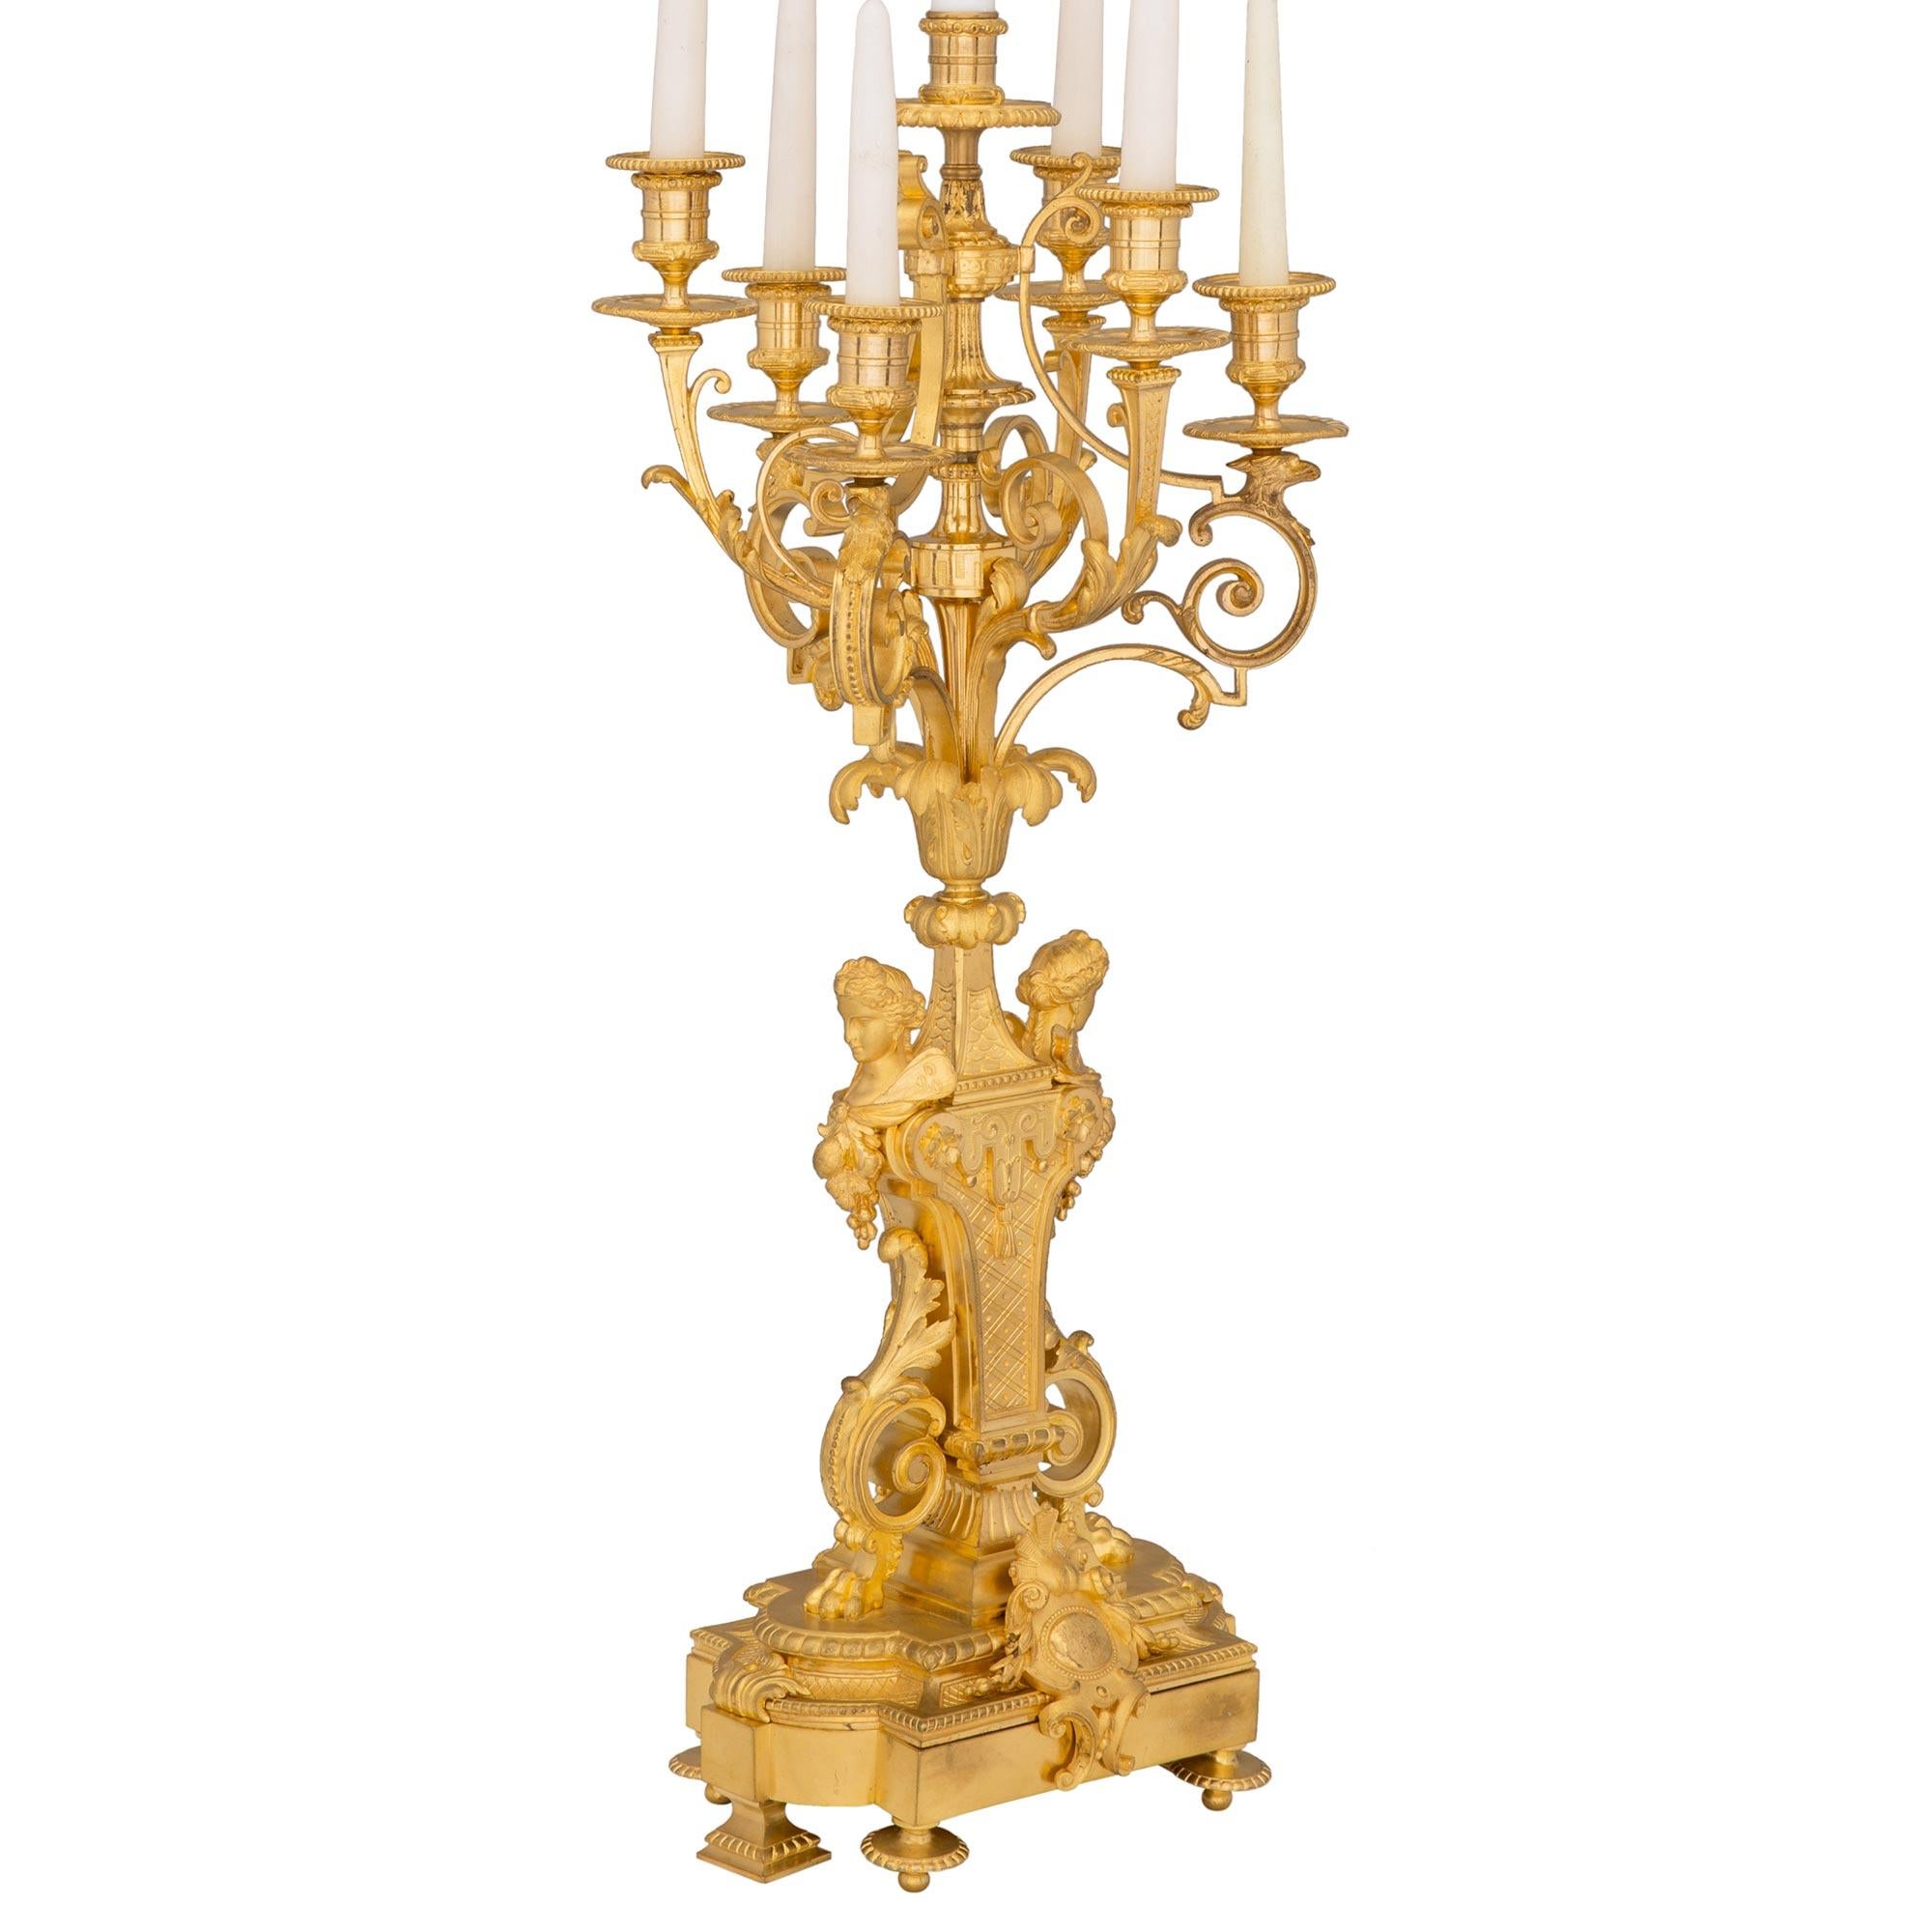 An exceptional and unique pair of French 19th century Louis XVI st. Belle Époque period ormolu six arm candelabra lamps. Each lamp is raised by elegant topie shaped feet and square tapered supports below a mottled border. At the center are